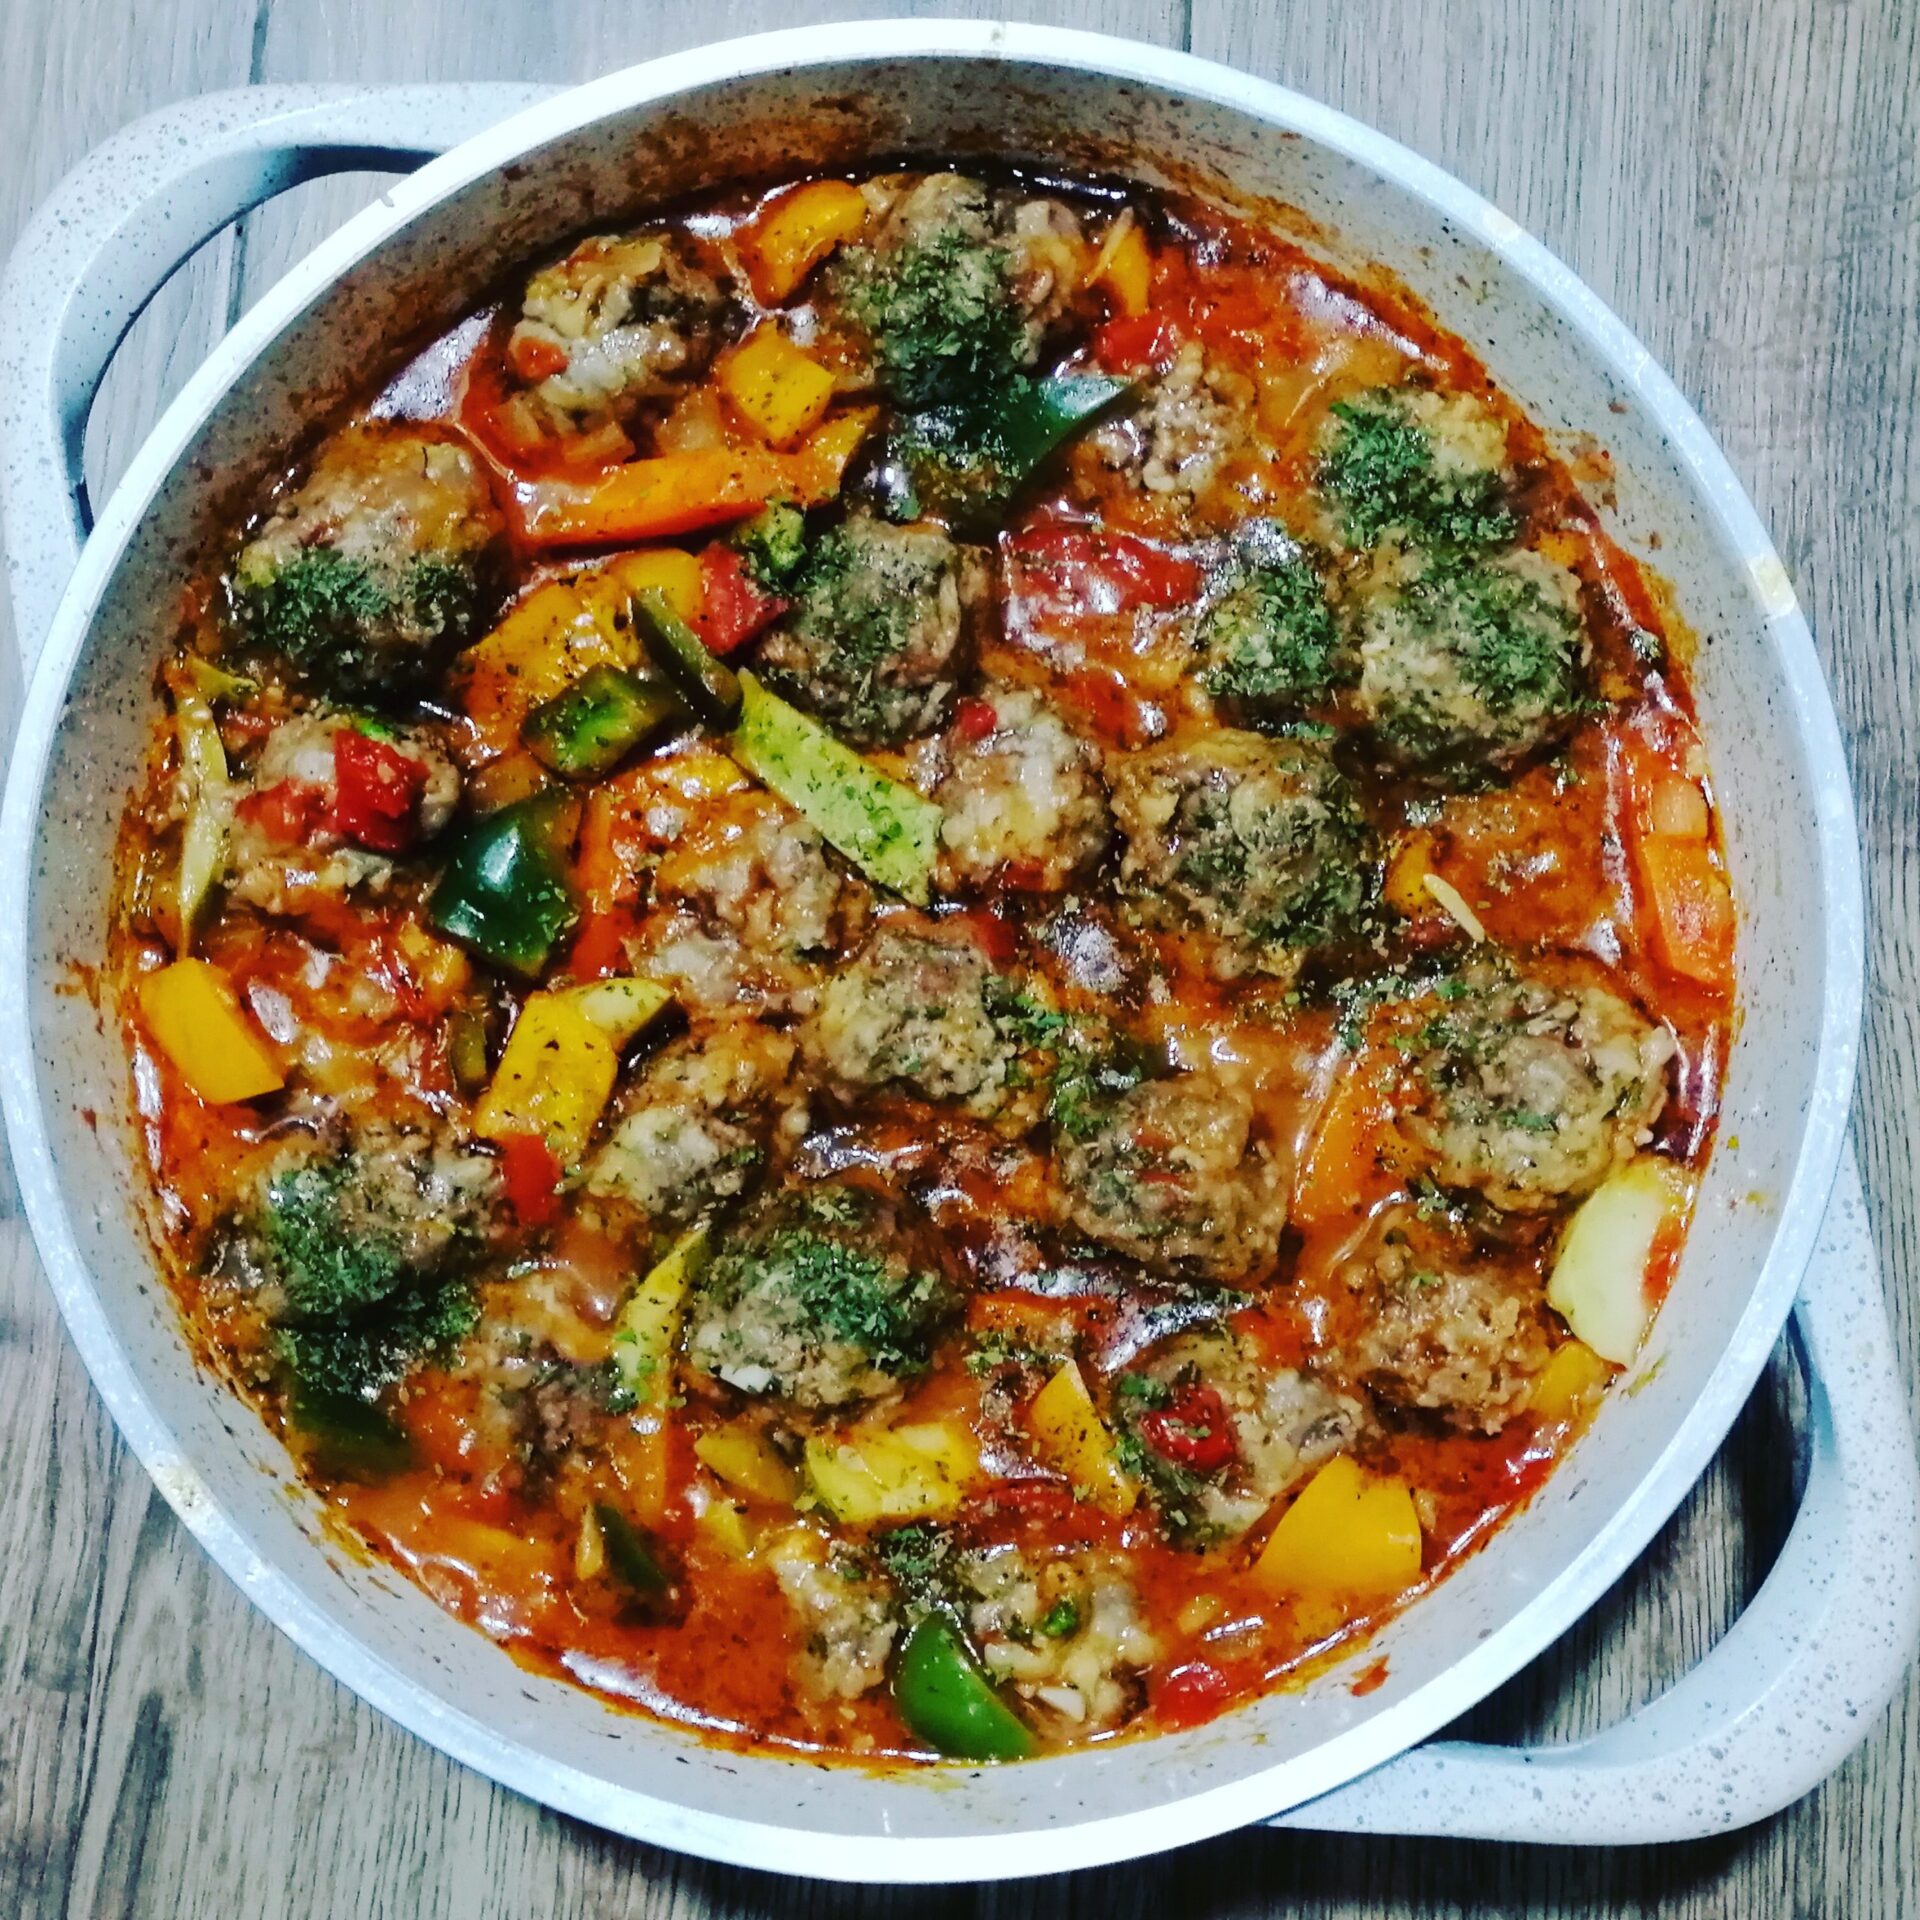 Meatballs and mixed vegetables